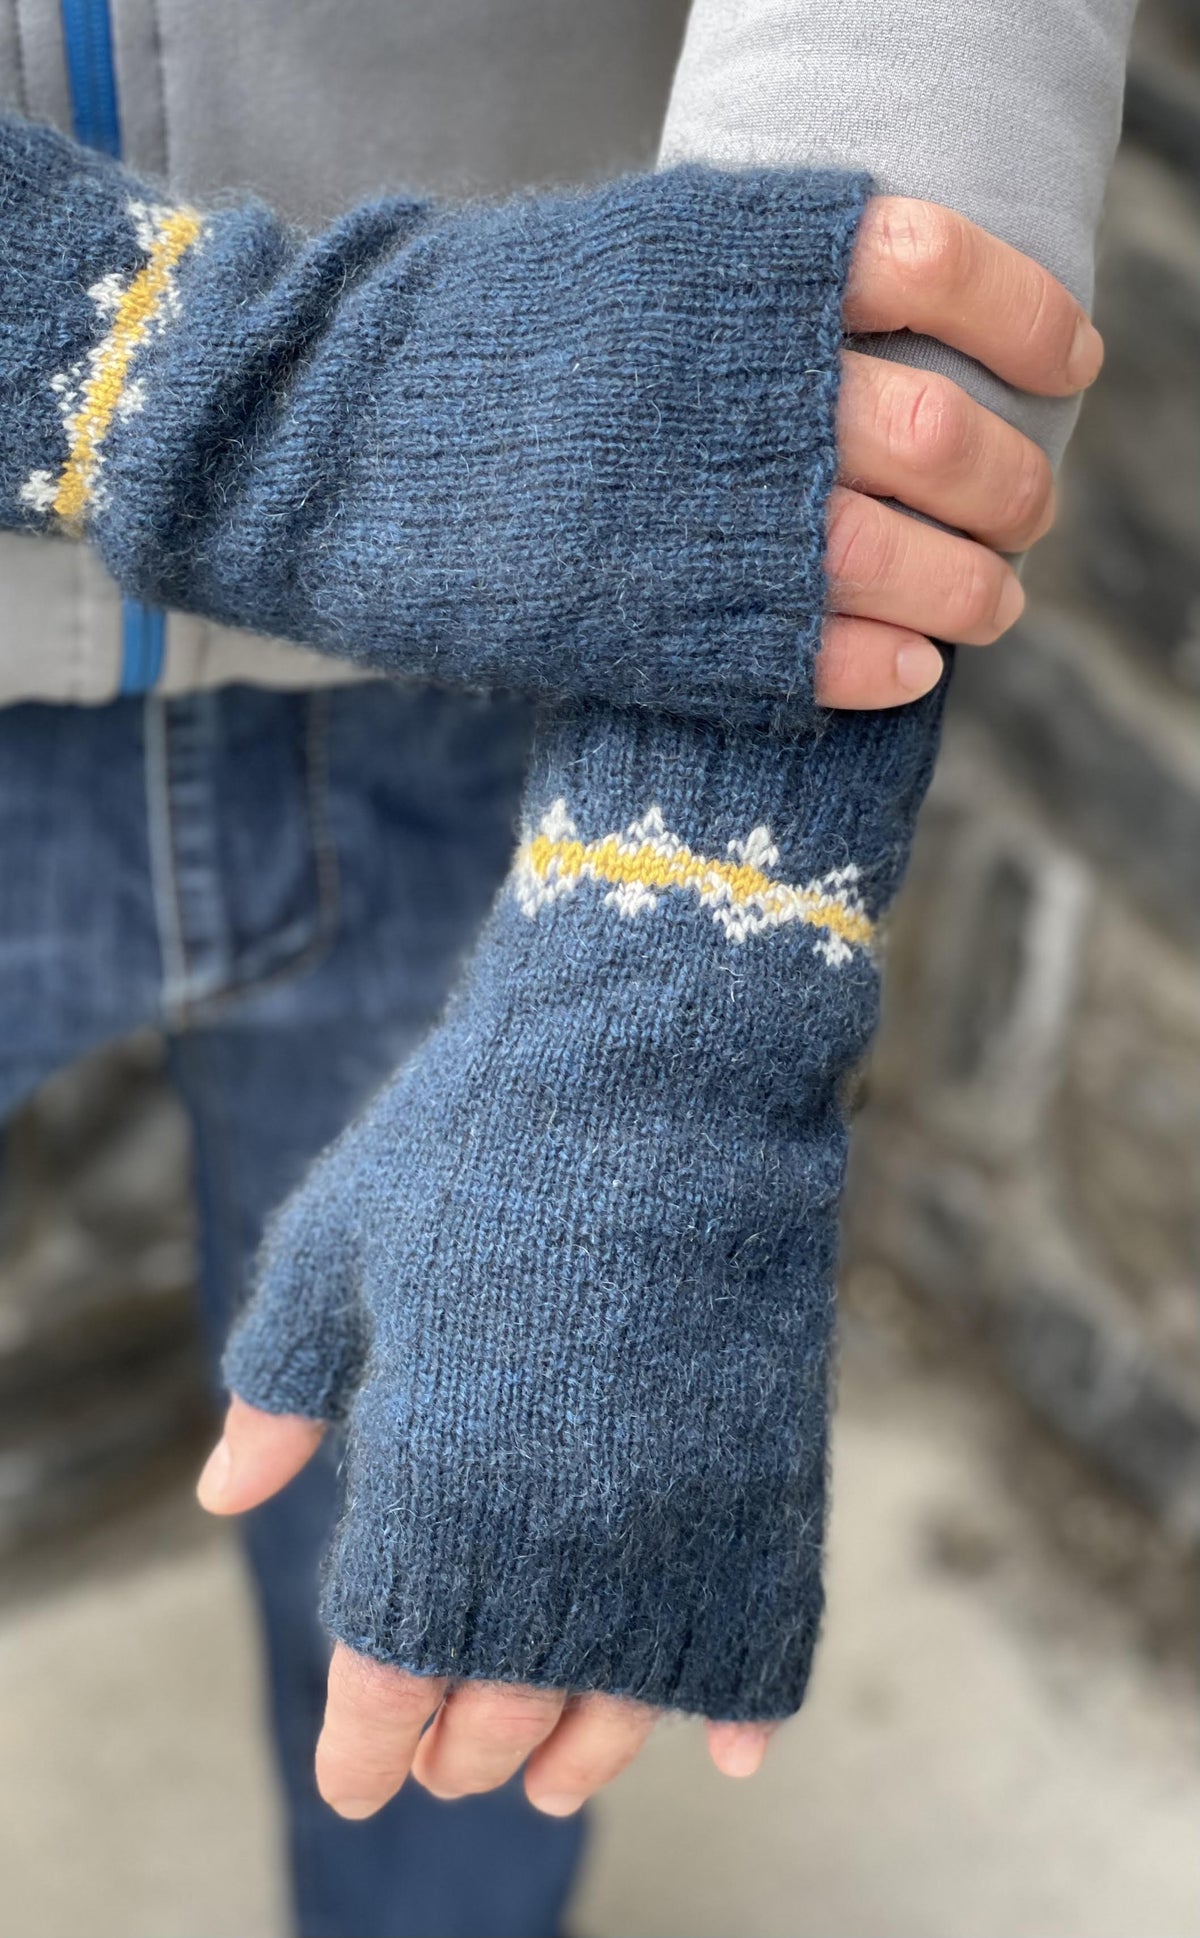 Learn to Knit Kit: Fingerless Mitts – gather here online